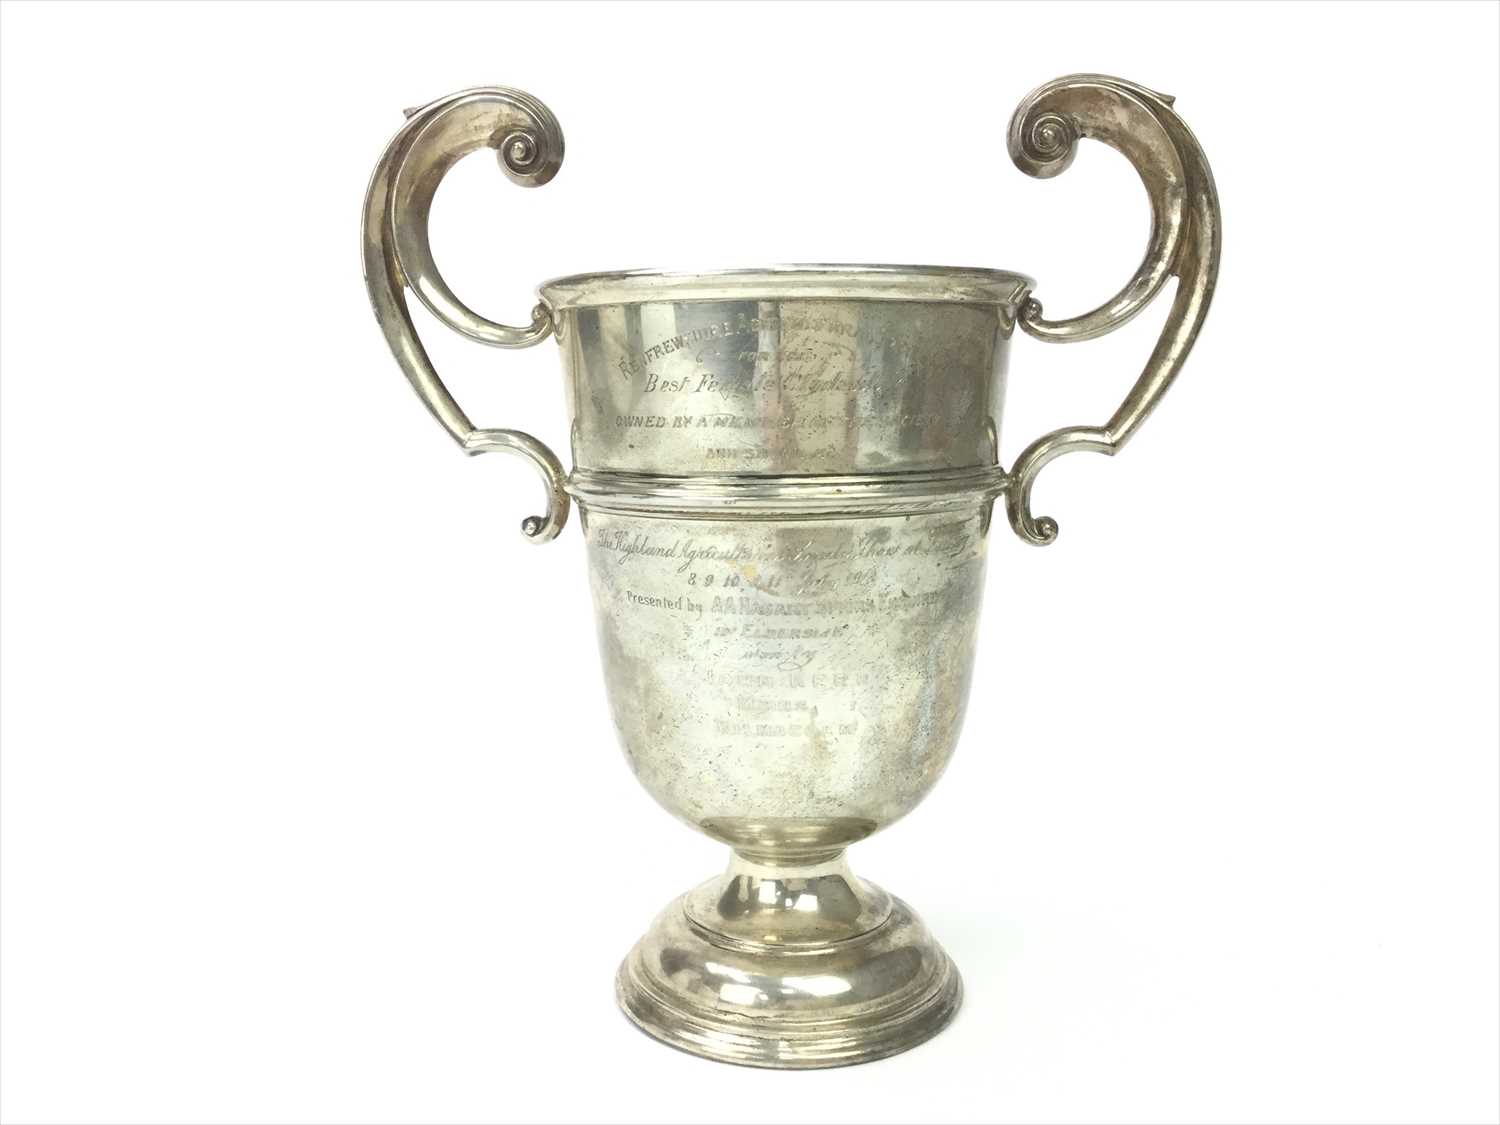 Lot 1731 - A SILVER TROPHY PRESENTED BY THE RENFREWSHIRE AGRICULTURAL SOCIETY IN 1913